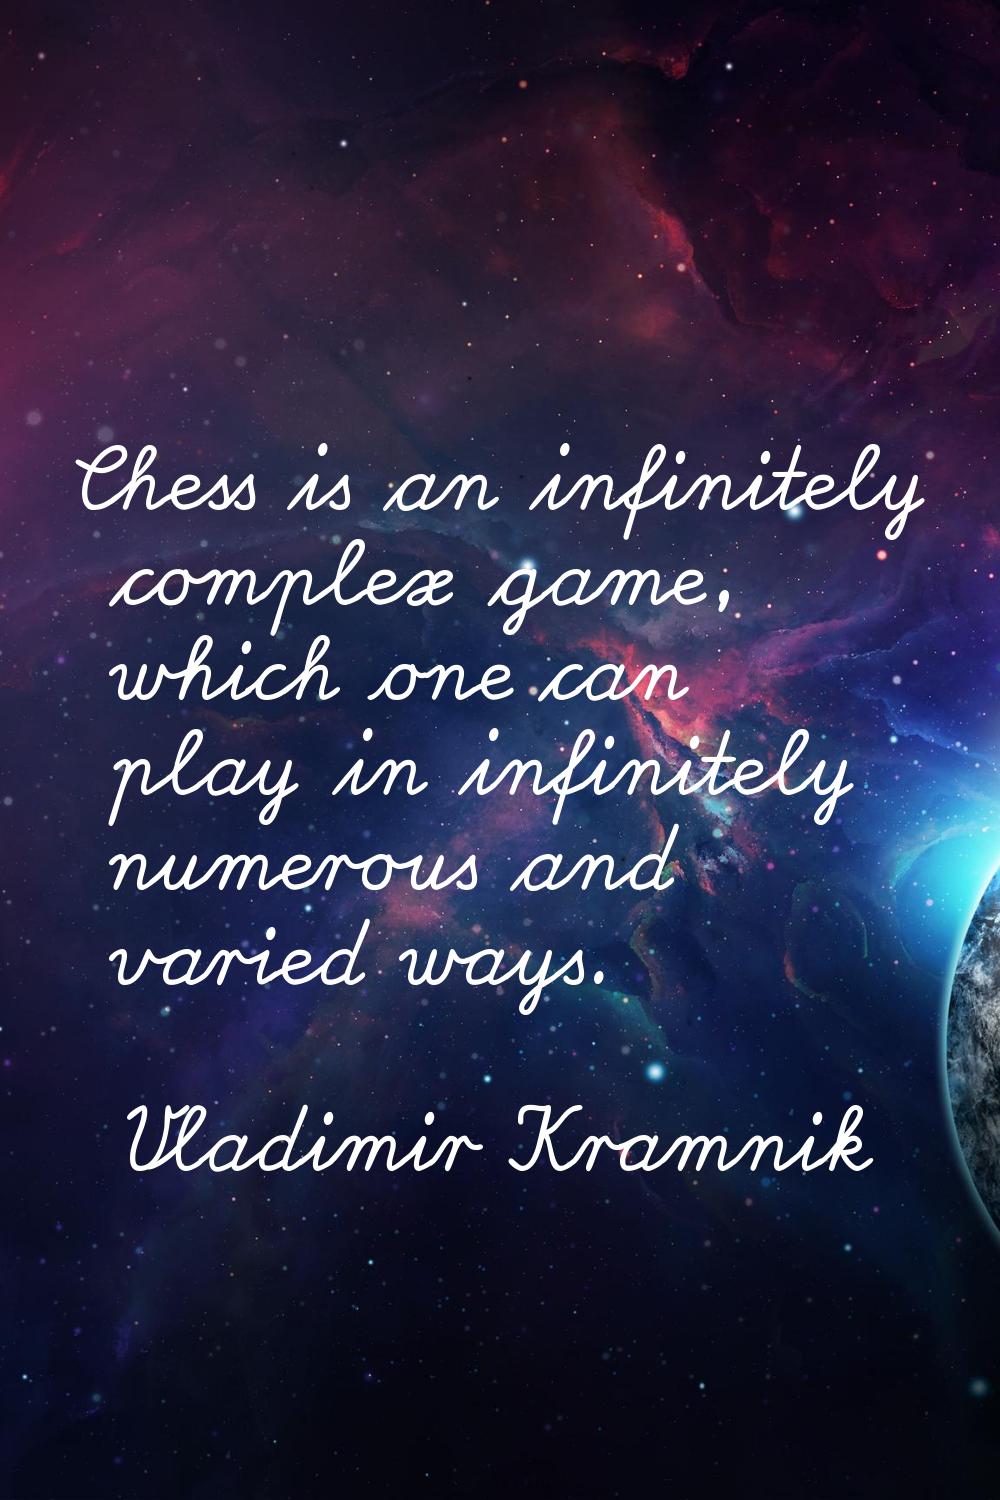 Chess is an infinitely complex game, which one can play in infinitely numerous and varied ways.